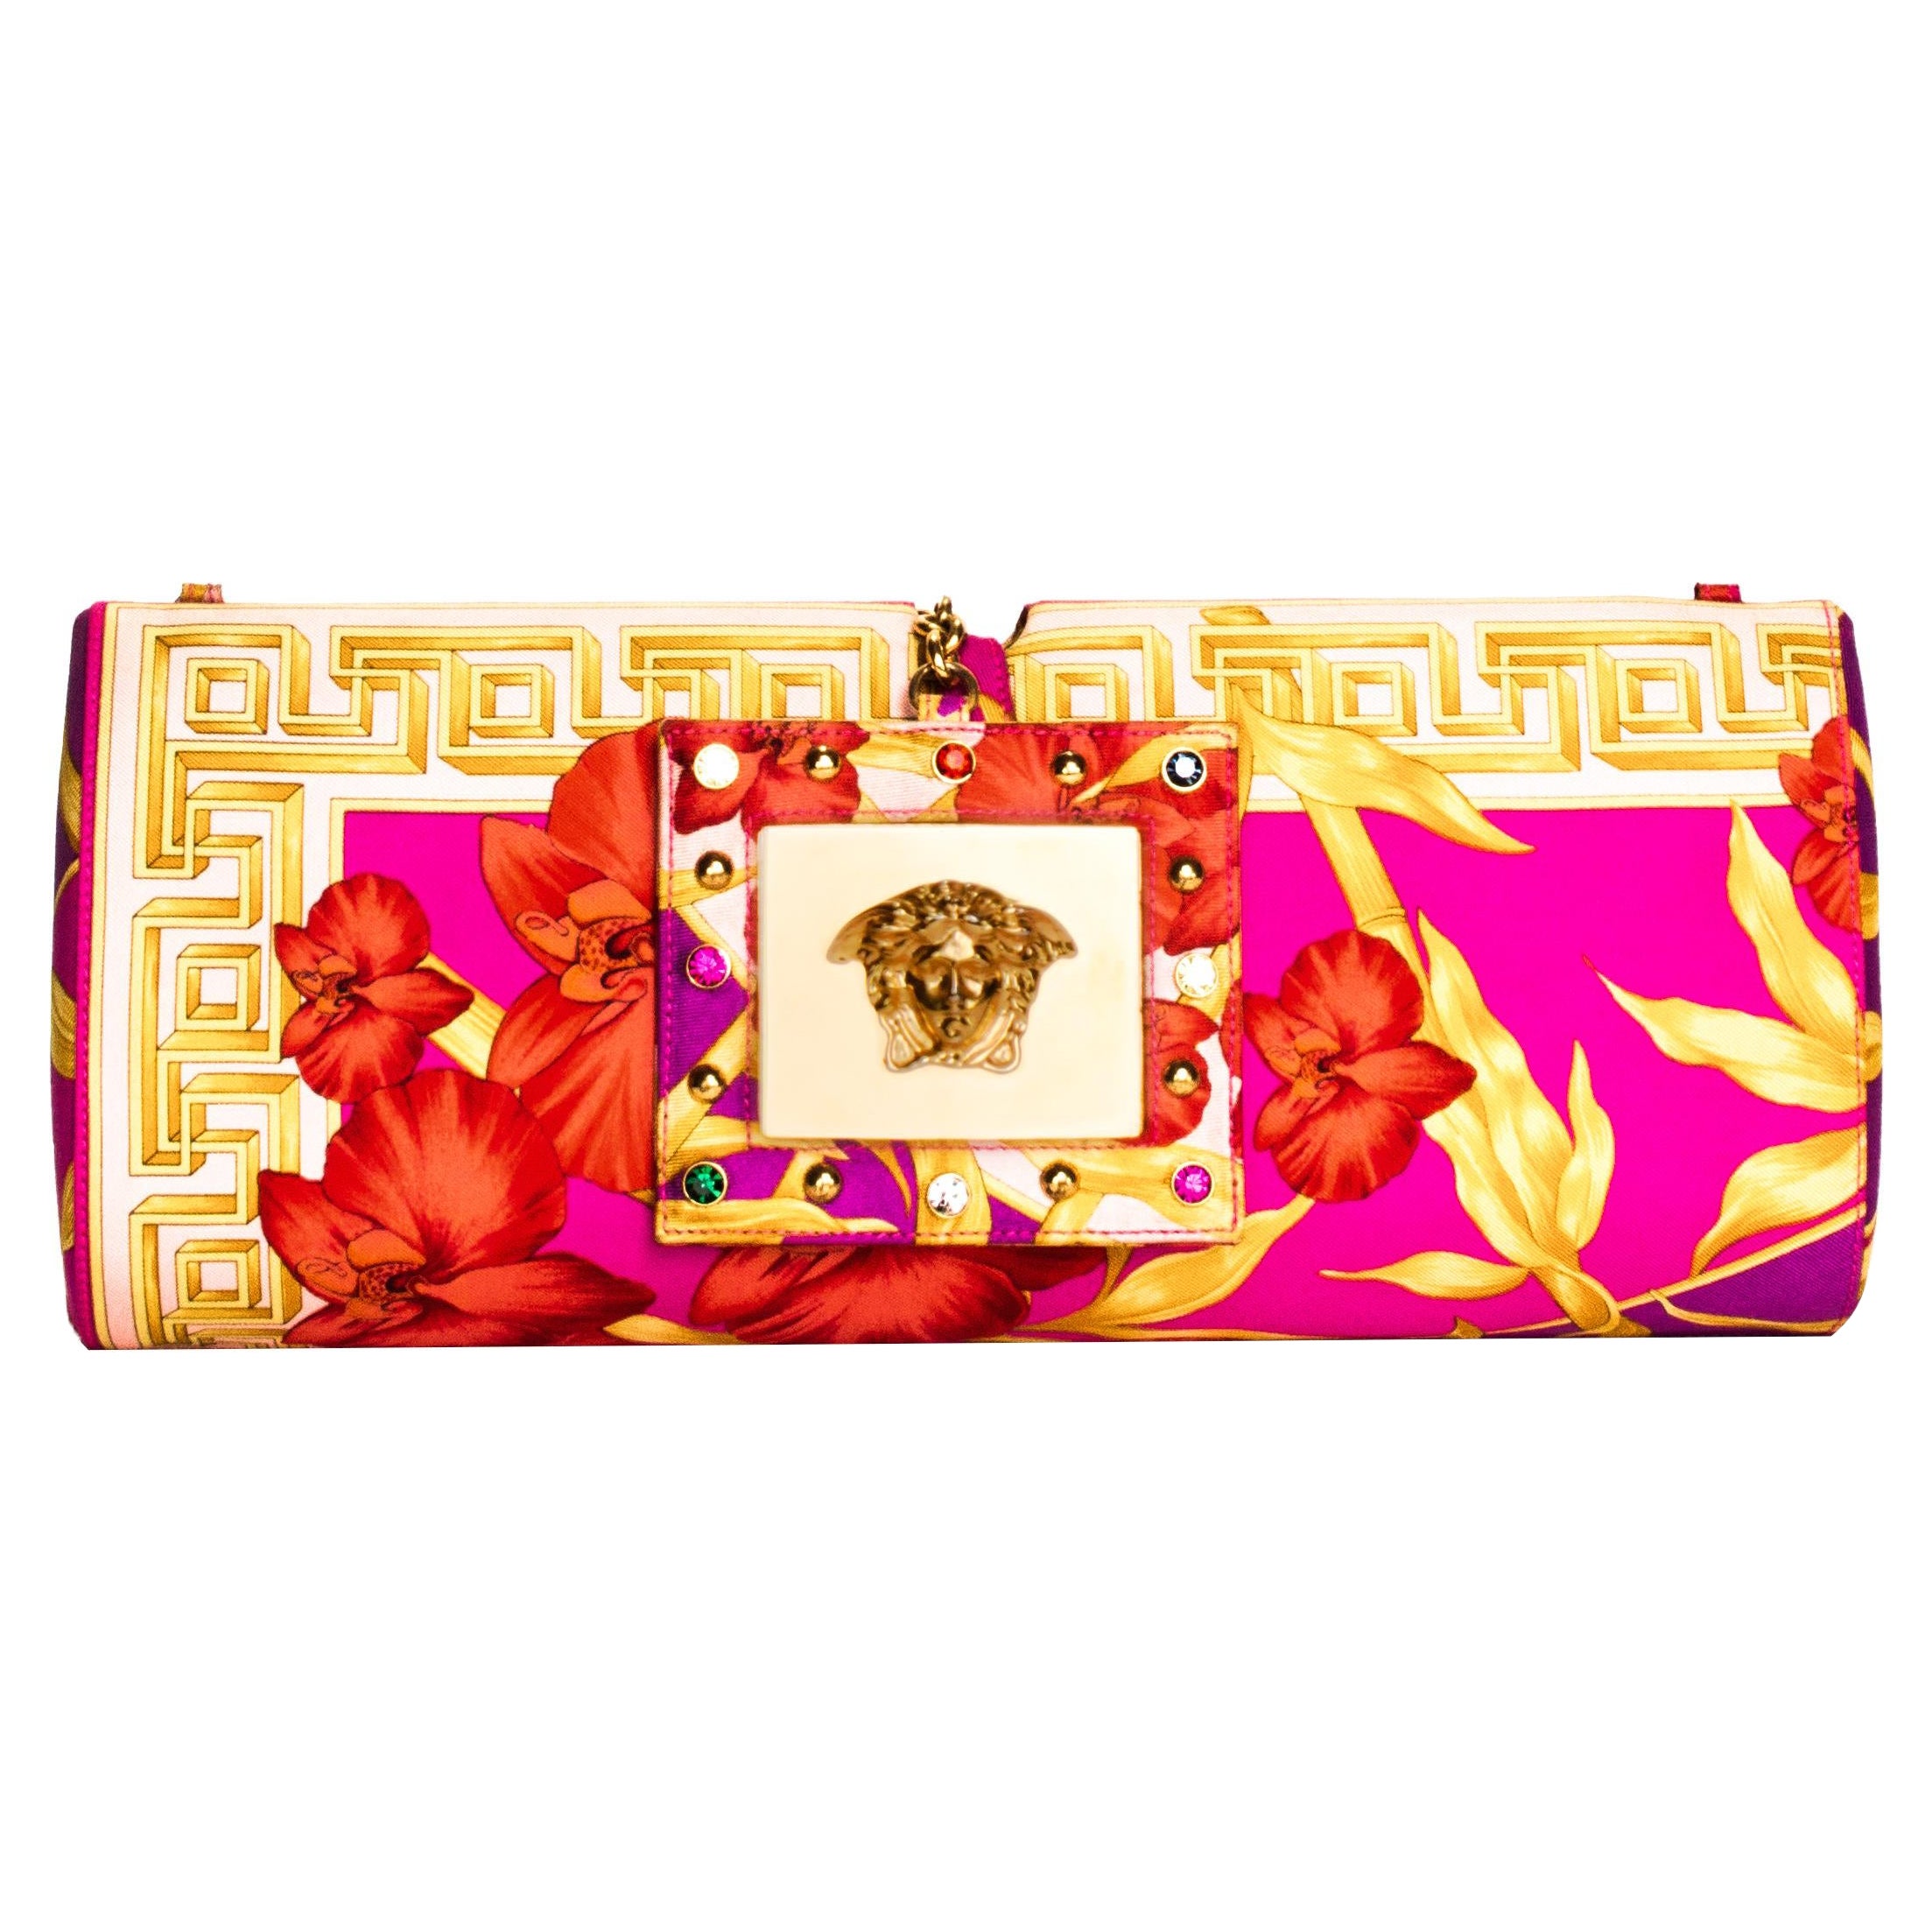 S/S 2000 Gianni Versace by Donatella Runway Pink Printed Silk Convertible Clutch